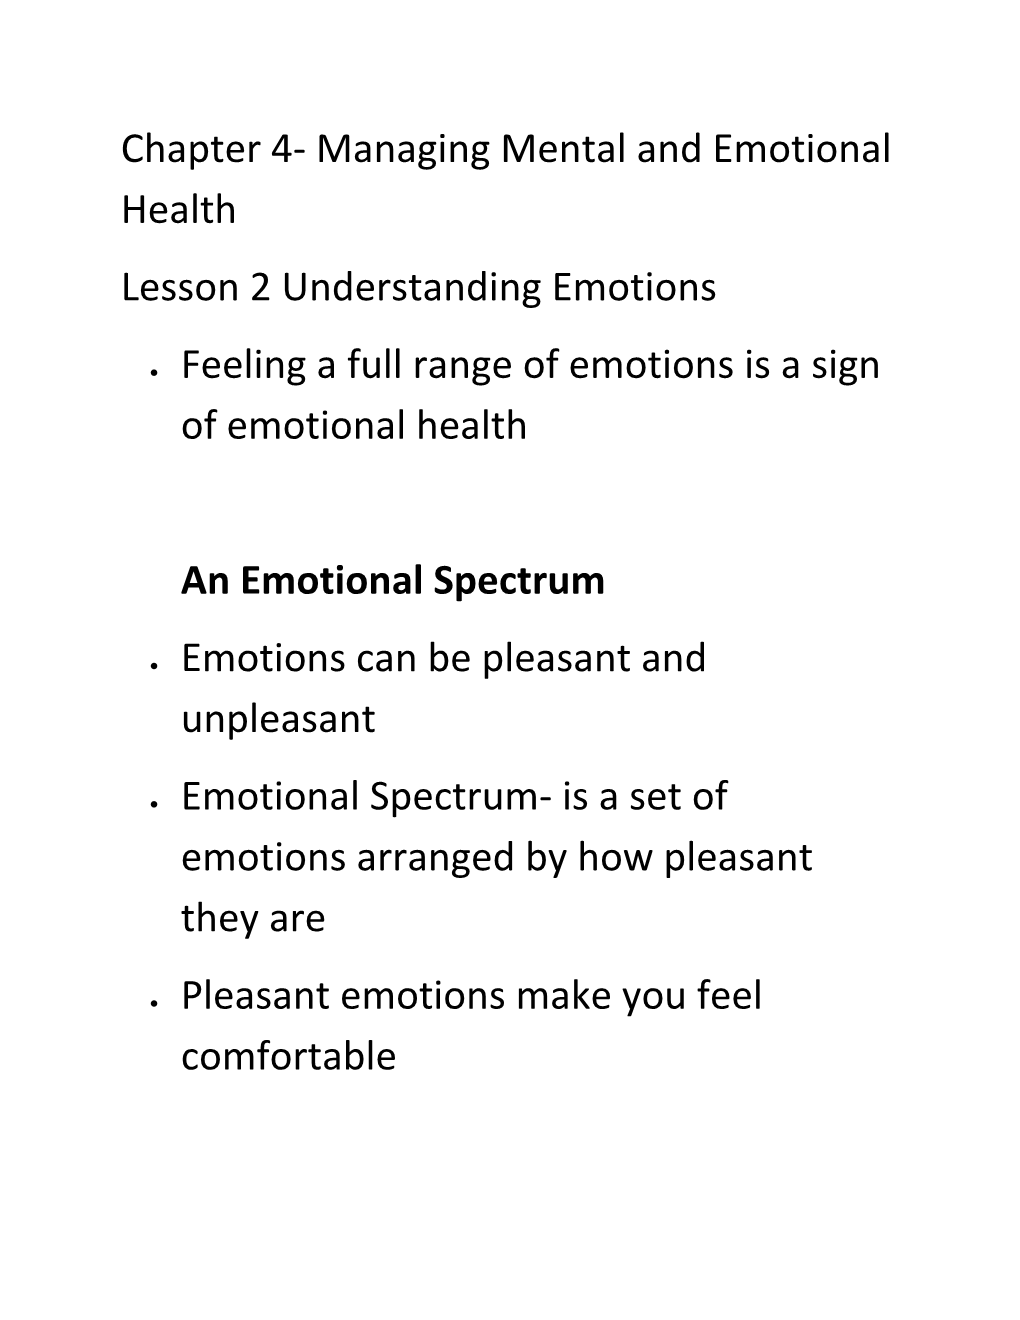 Chapter 4- Managing Mental and Emotional Health